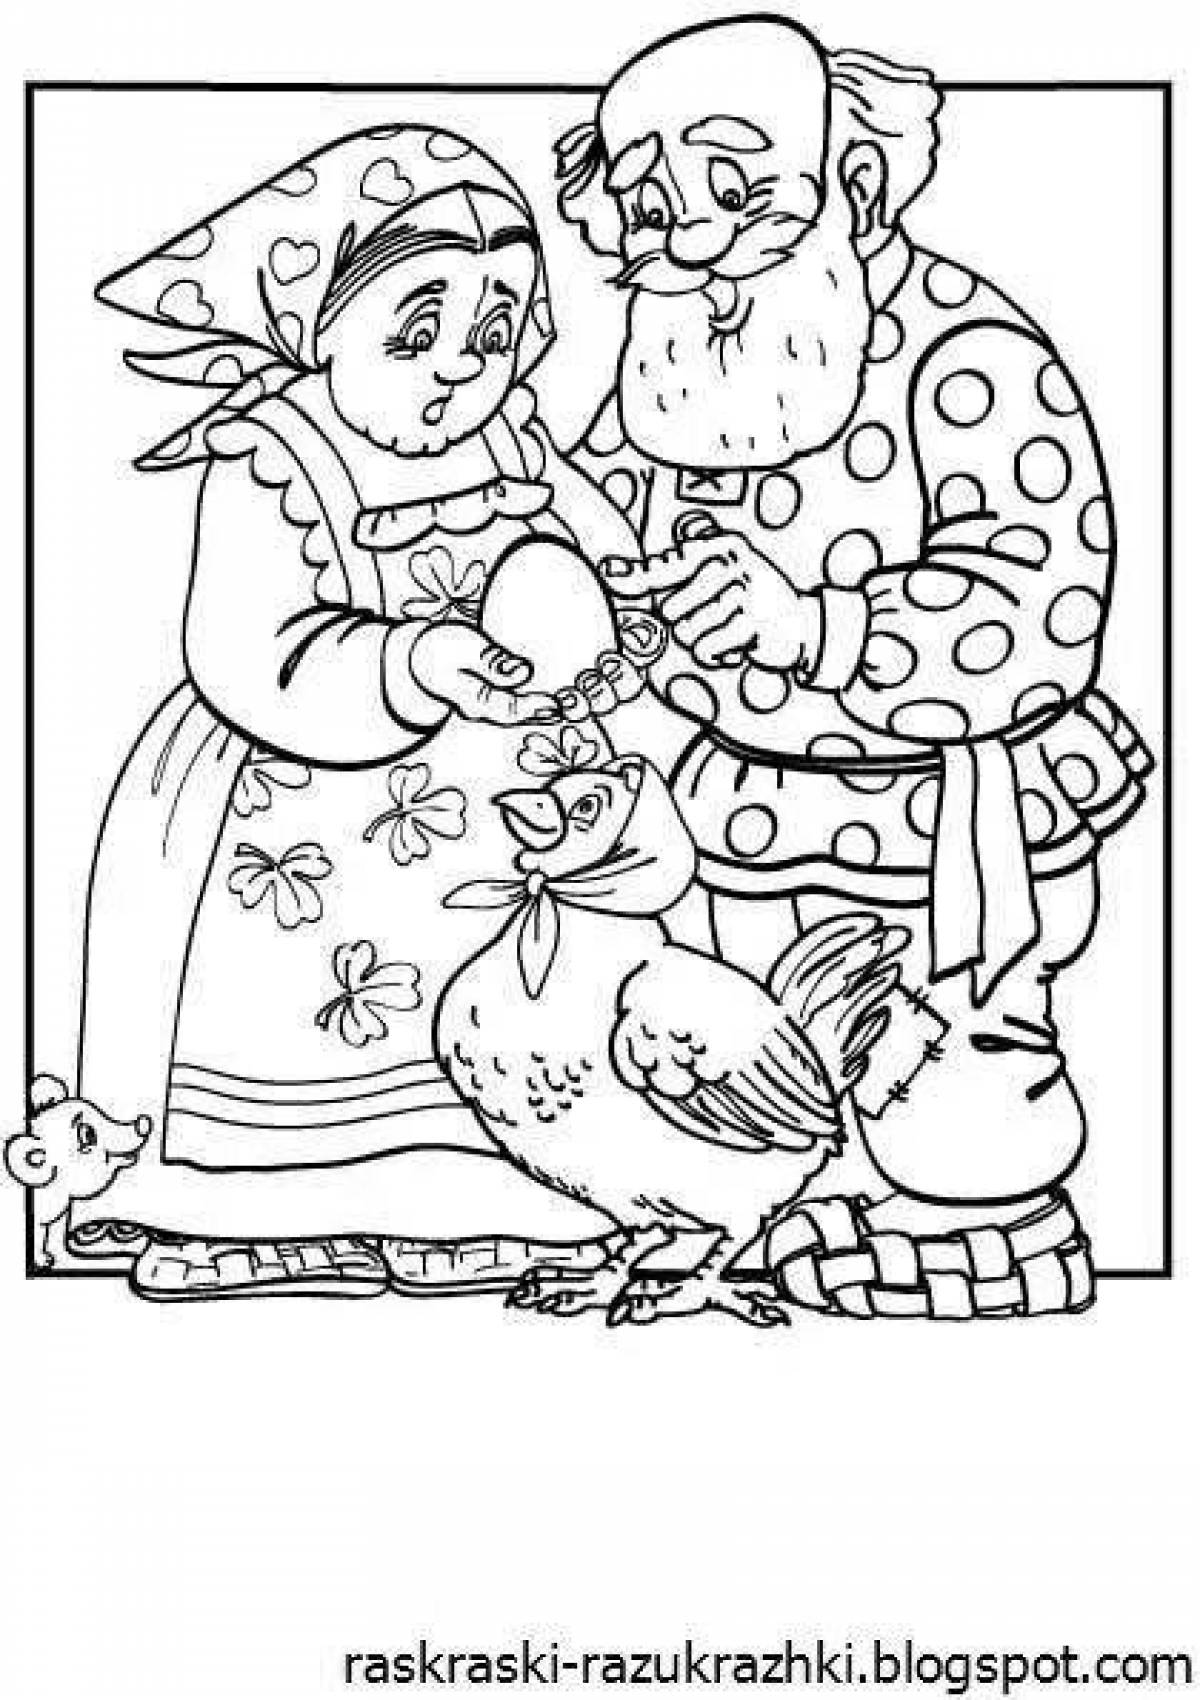 Chicken pockmarked coloring book for babies